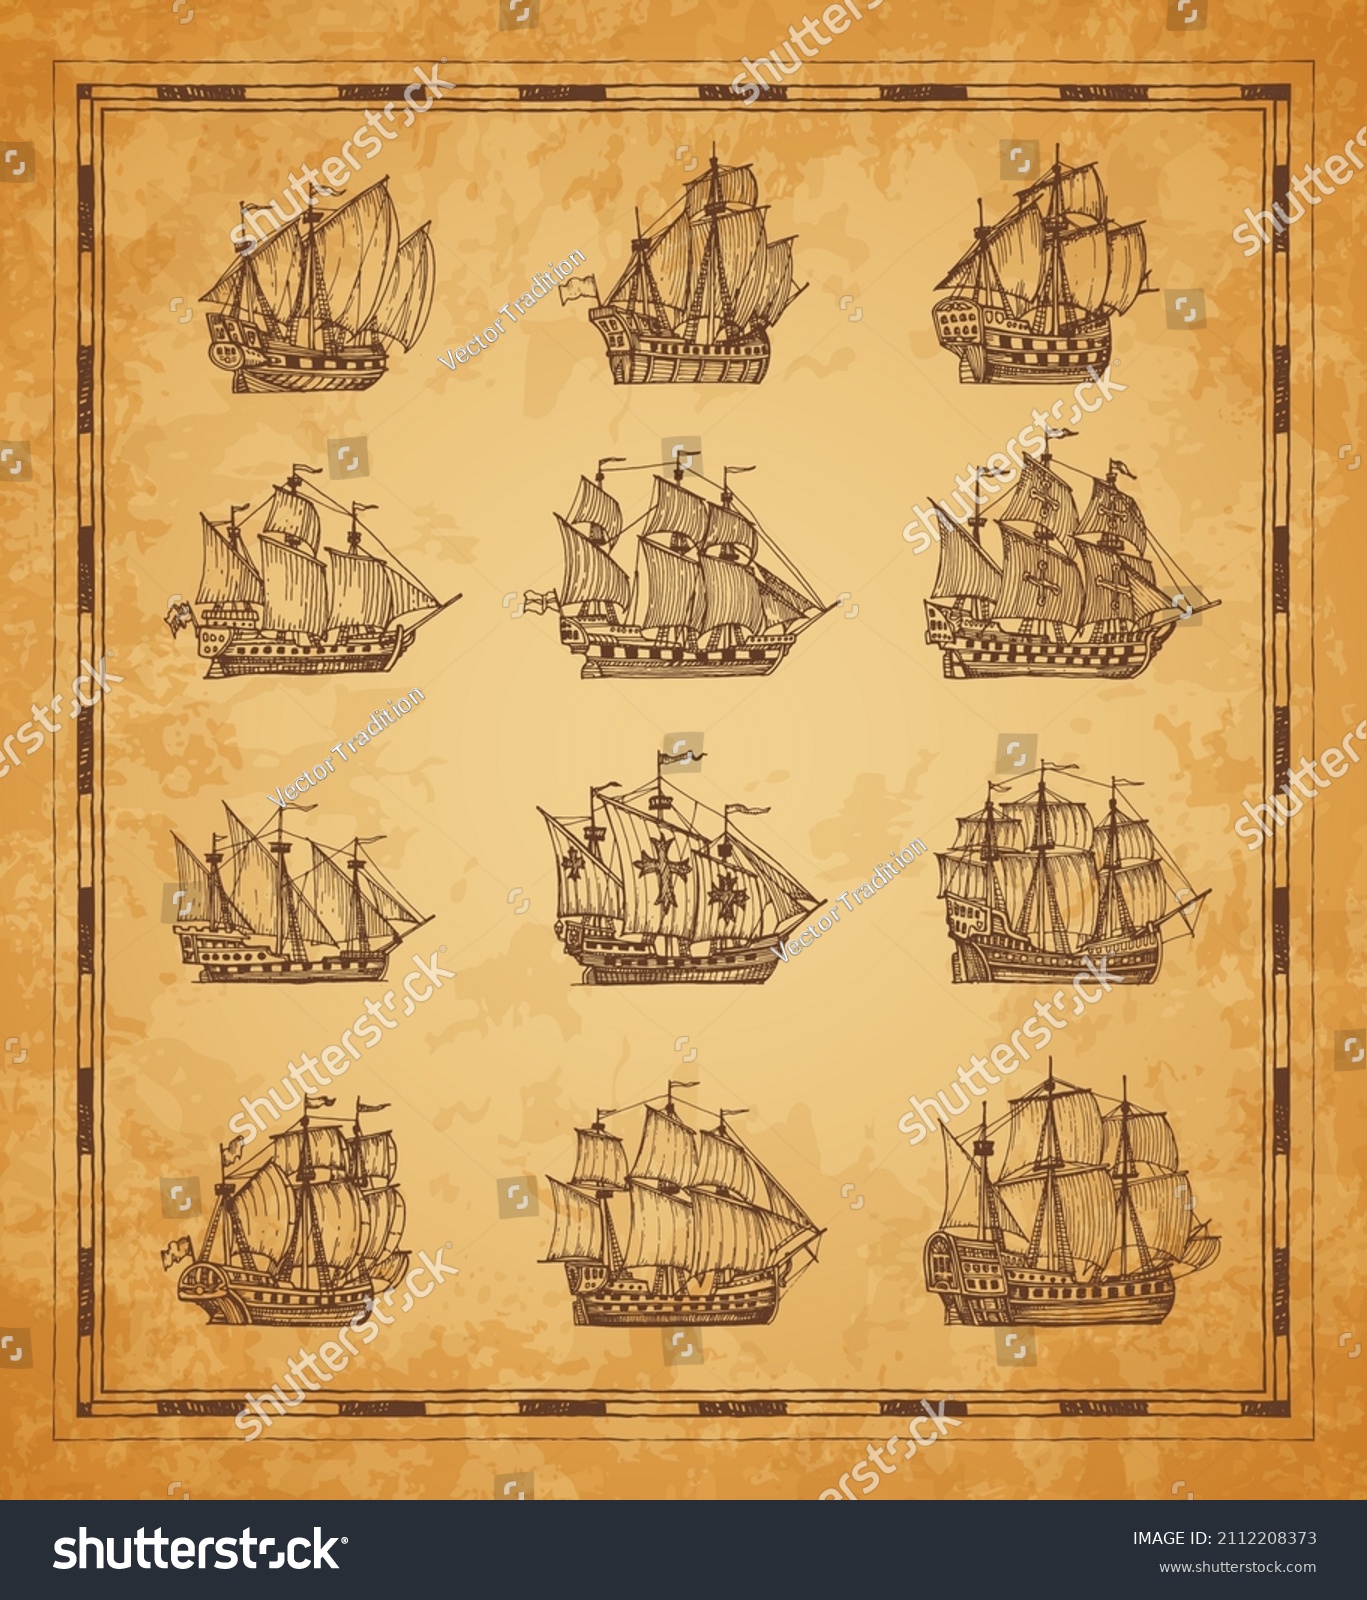 SVG of Vintage pirate sail ships and sailboats. Old vessel frigate, brigantine and caravel sketch. Ancient map hand drawn element, nautical travel, geographical discoveries era engraved vector battleship svg